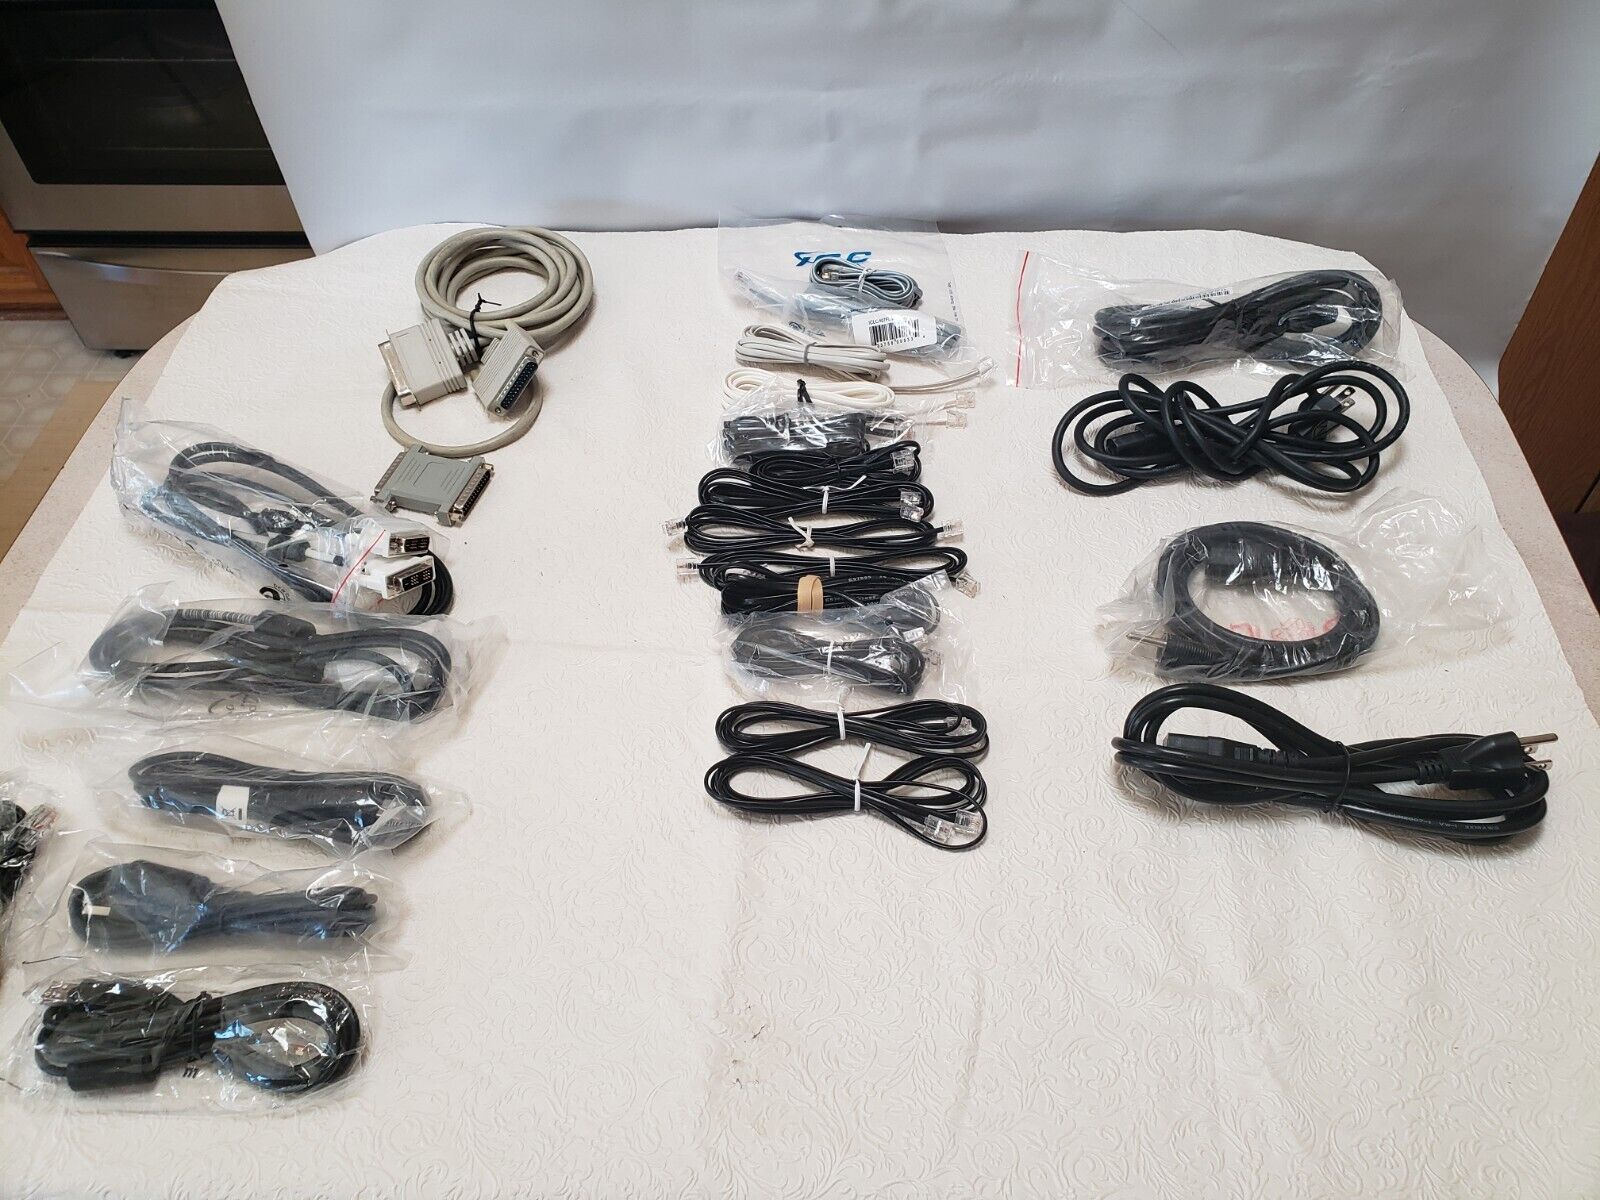 Lot Of 25 Vintage Computer & Printer Cables, Power Cards, USB Plugs, SEE PHOTOS 